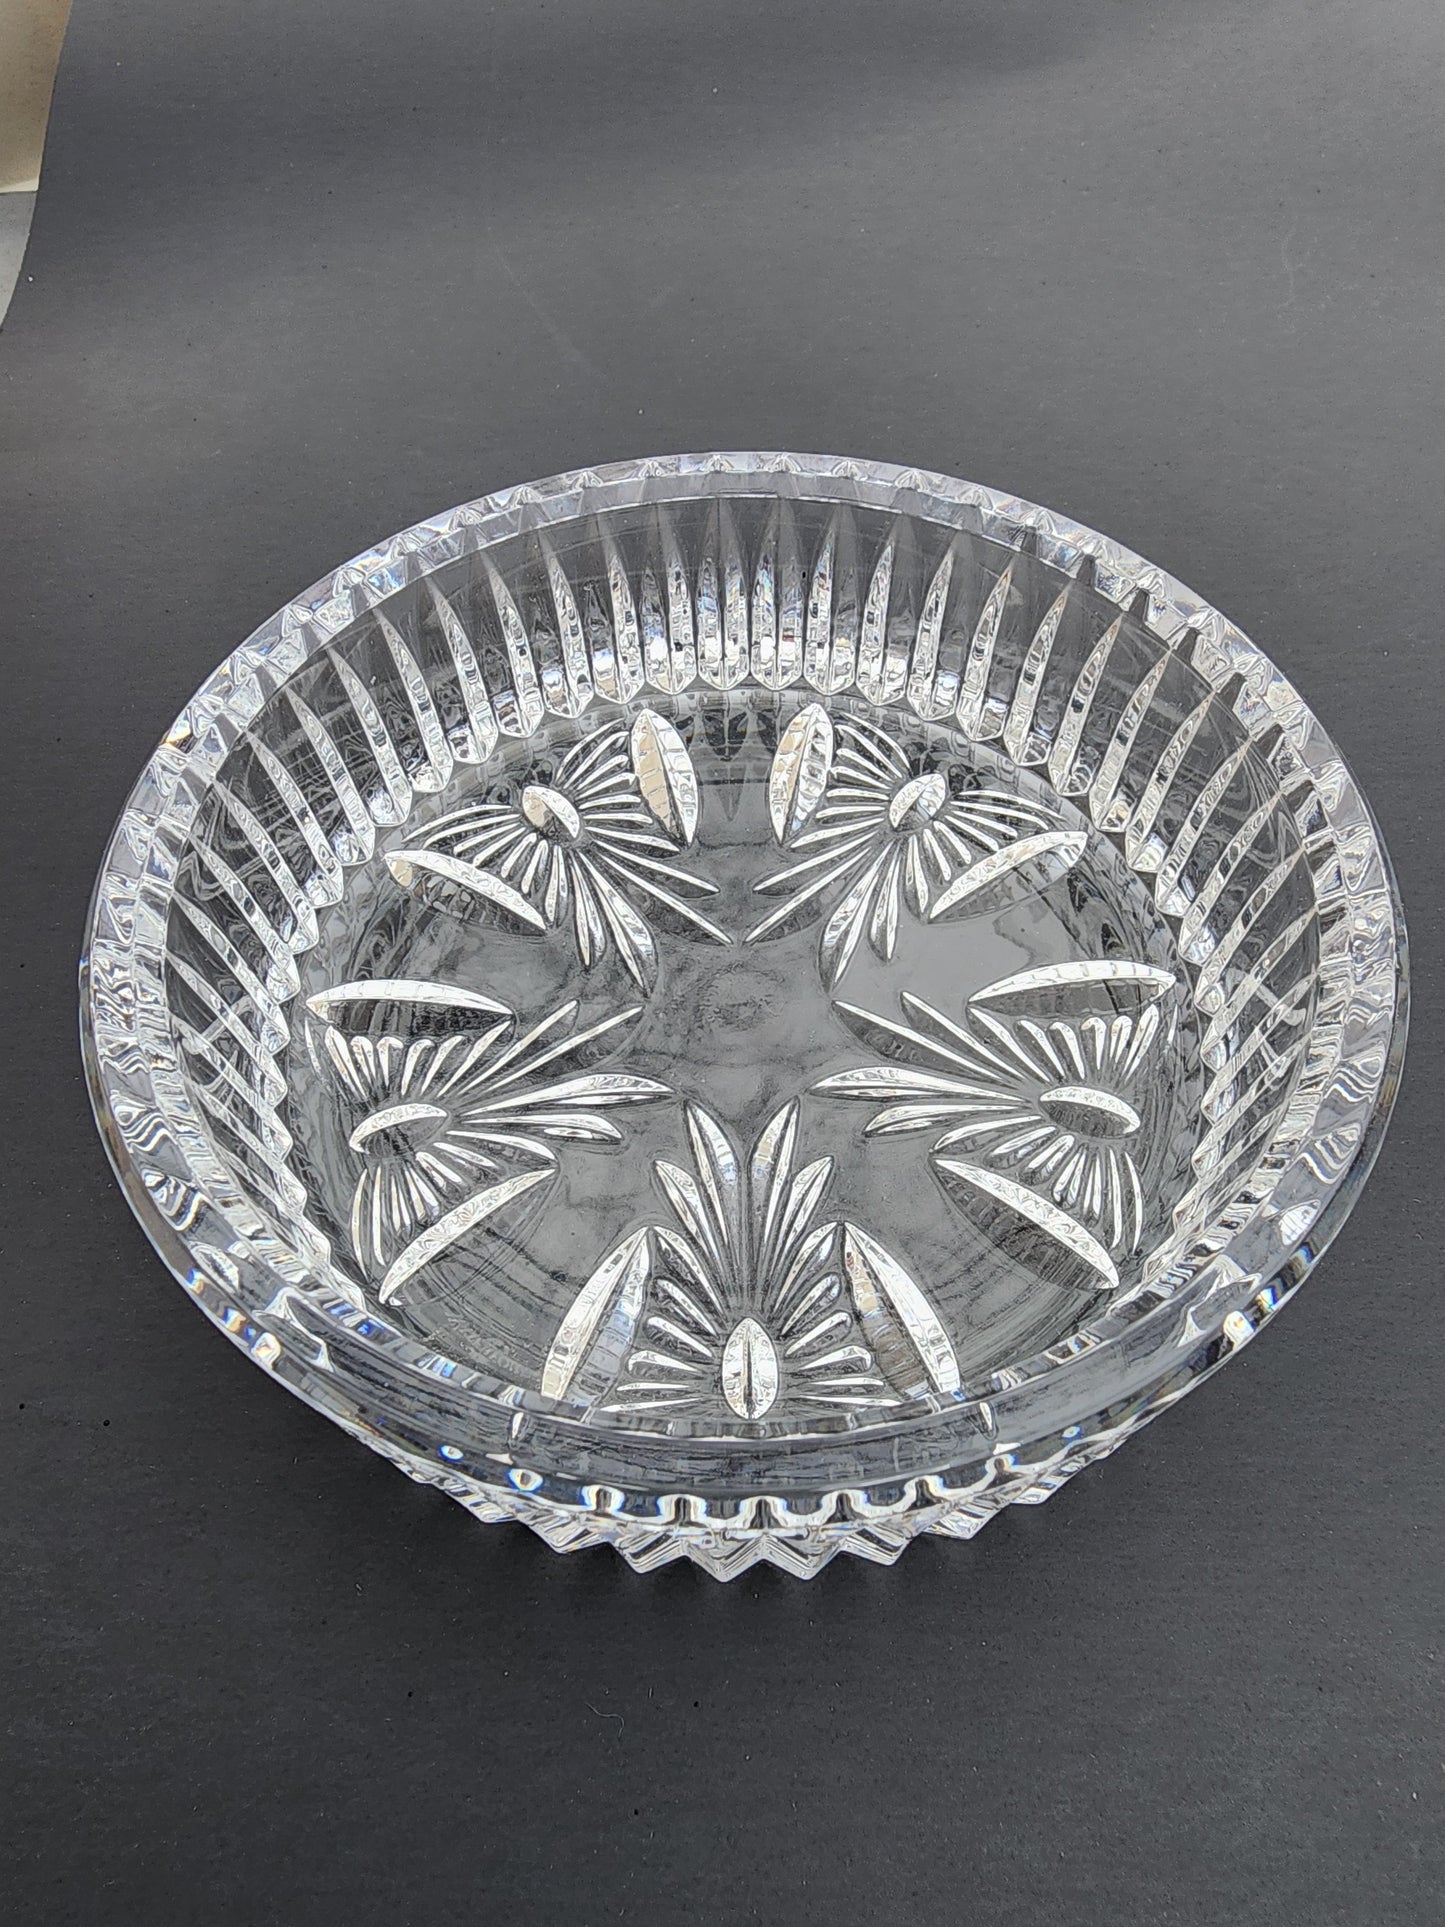 Signed Waterford CRYSTAL wine bottle coaster